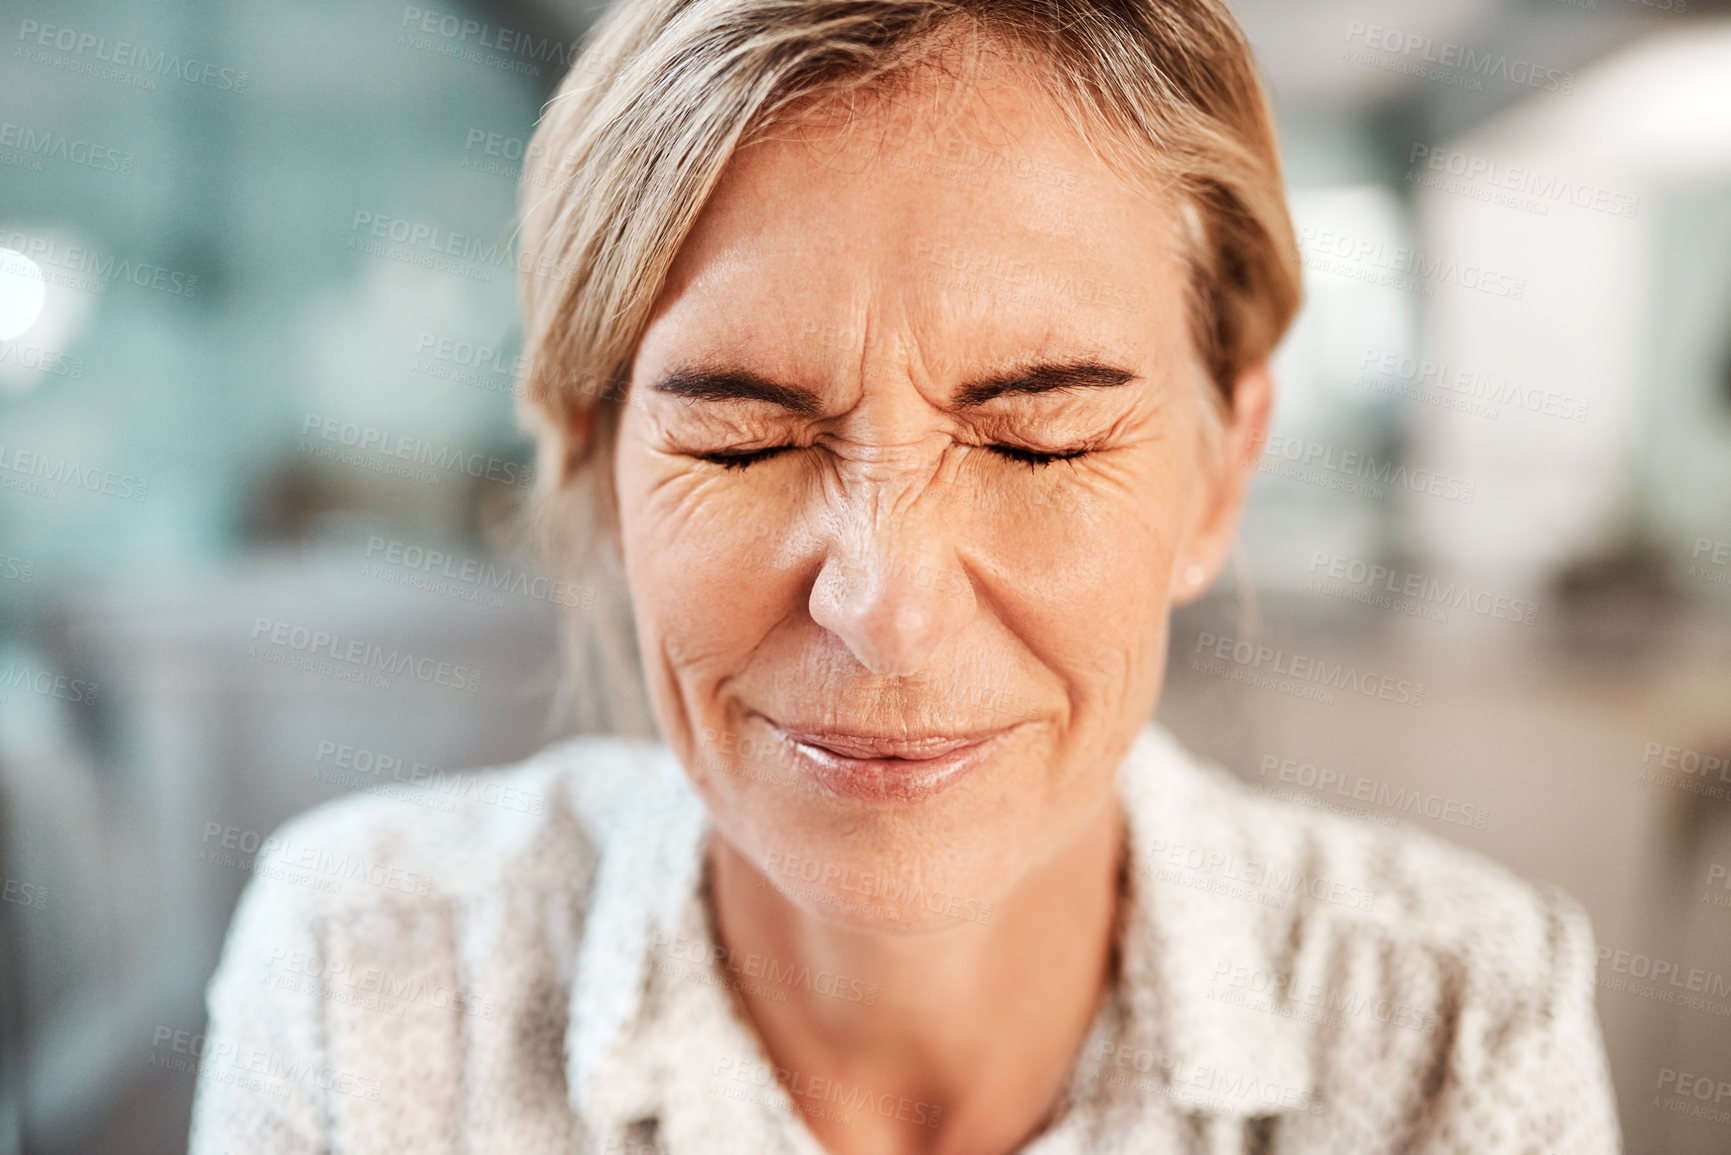 Buy stock photo Shot of a mature woman closing her eyes in pain